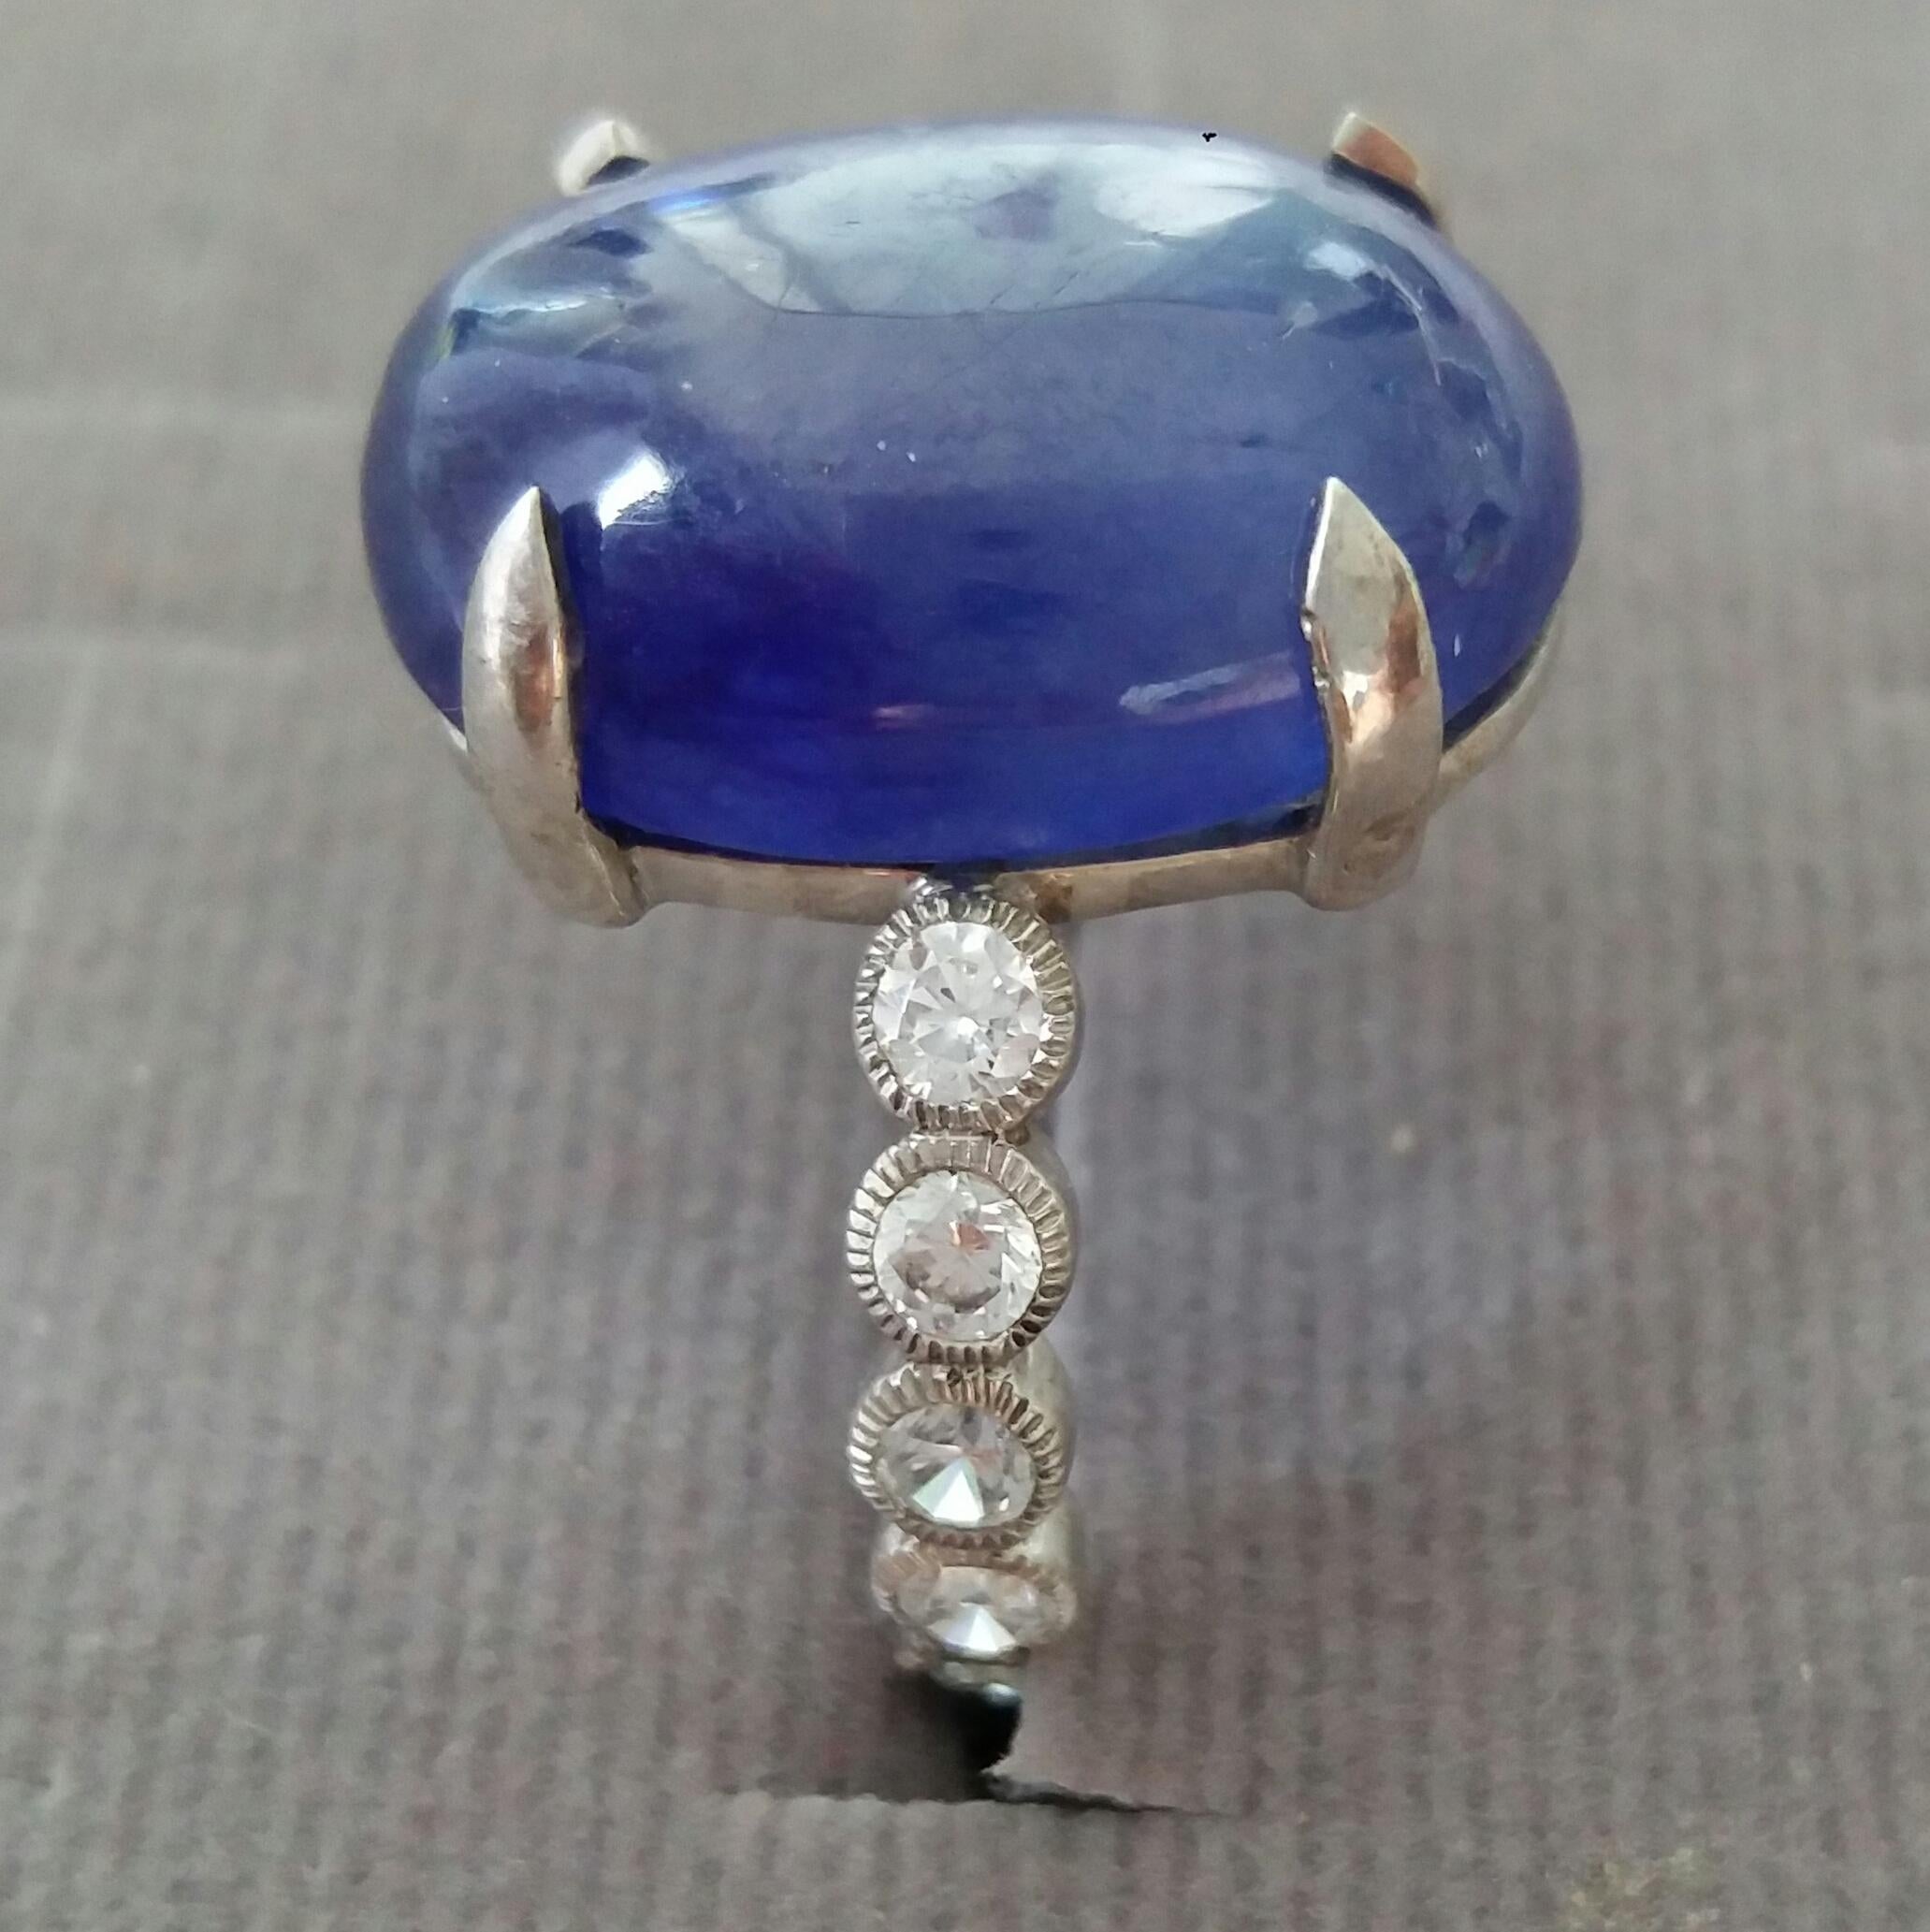 17 Carat Blue Sapphire Oval Cab ring ( 17,5 mm x 13 mm )  set with 3,3 grams of 14 kt white gold. 12 round full cut diamonds of 0,05 ct. each = 0,6 ct total diamonds weight
Ring Shank Diameter  23 mm
Height 25 mm
Weight 6 grams
In 1978 our workshop